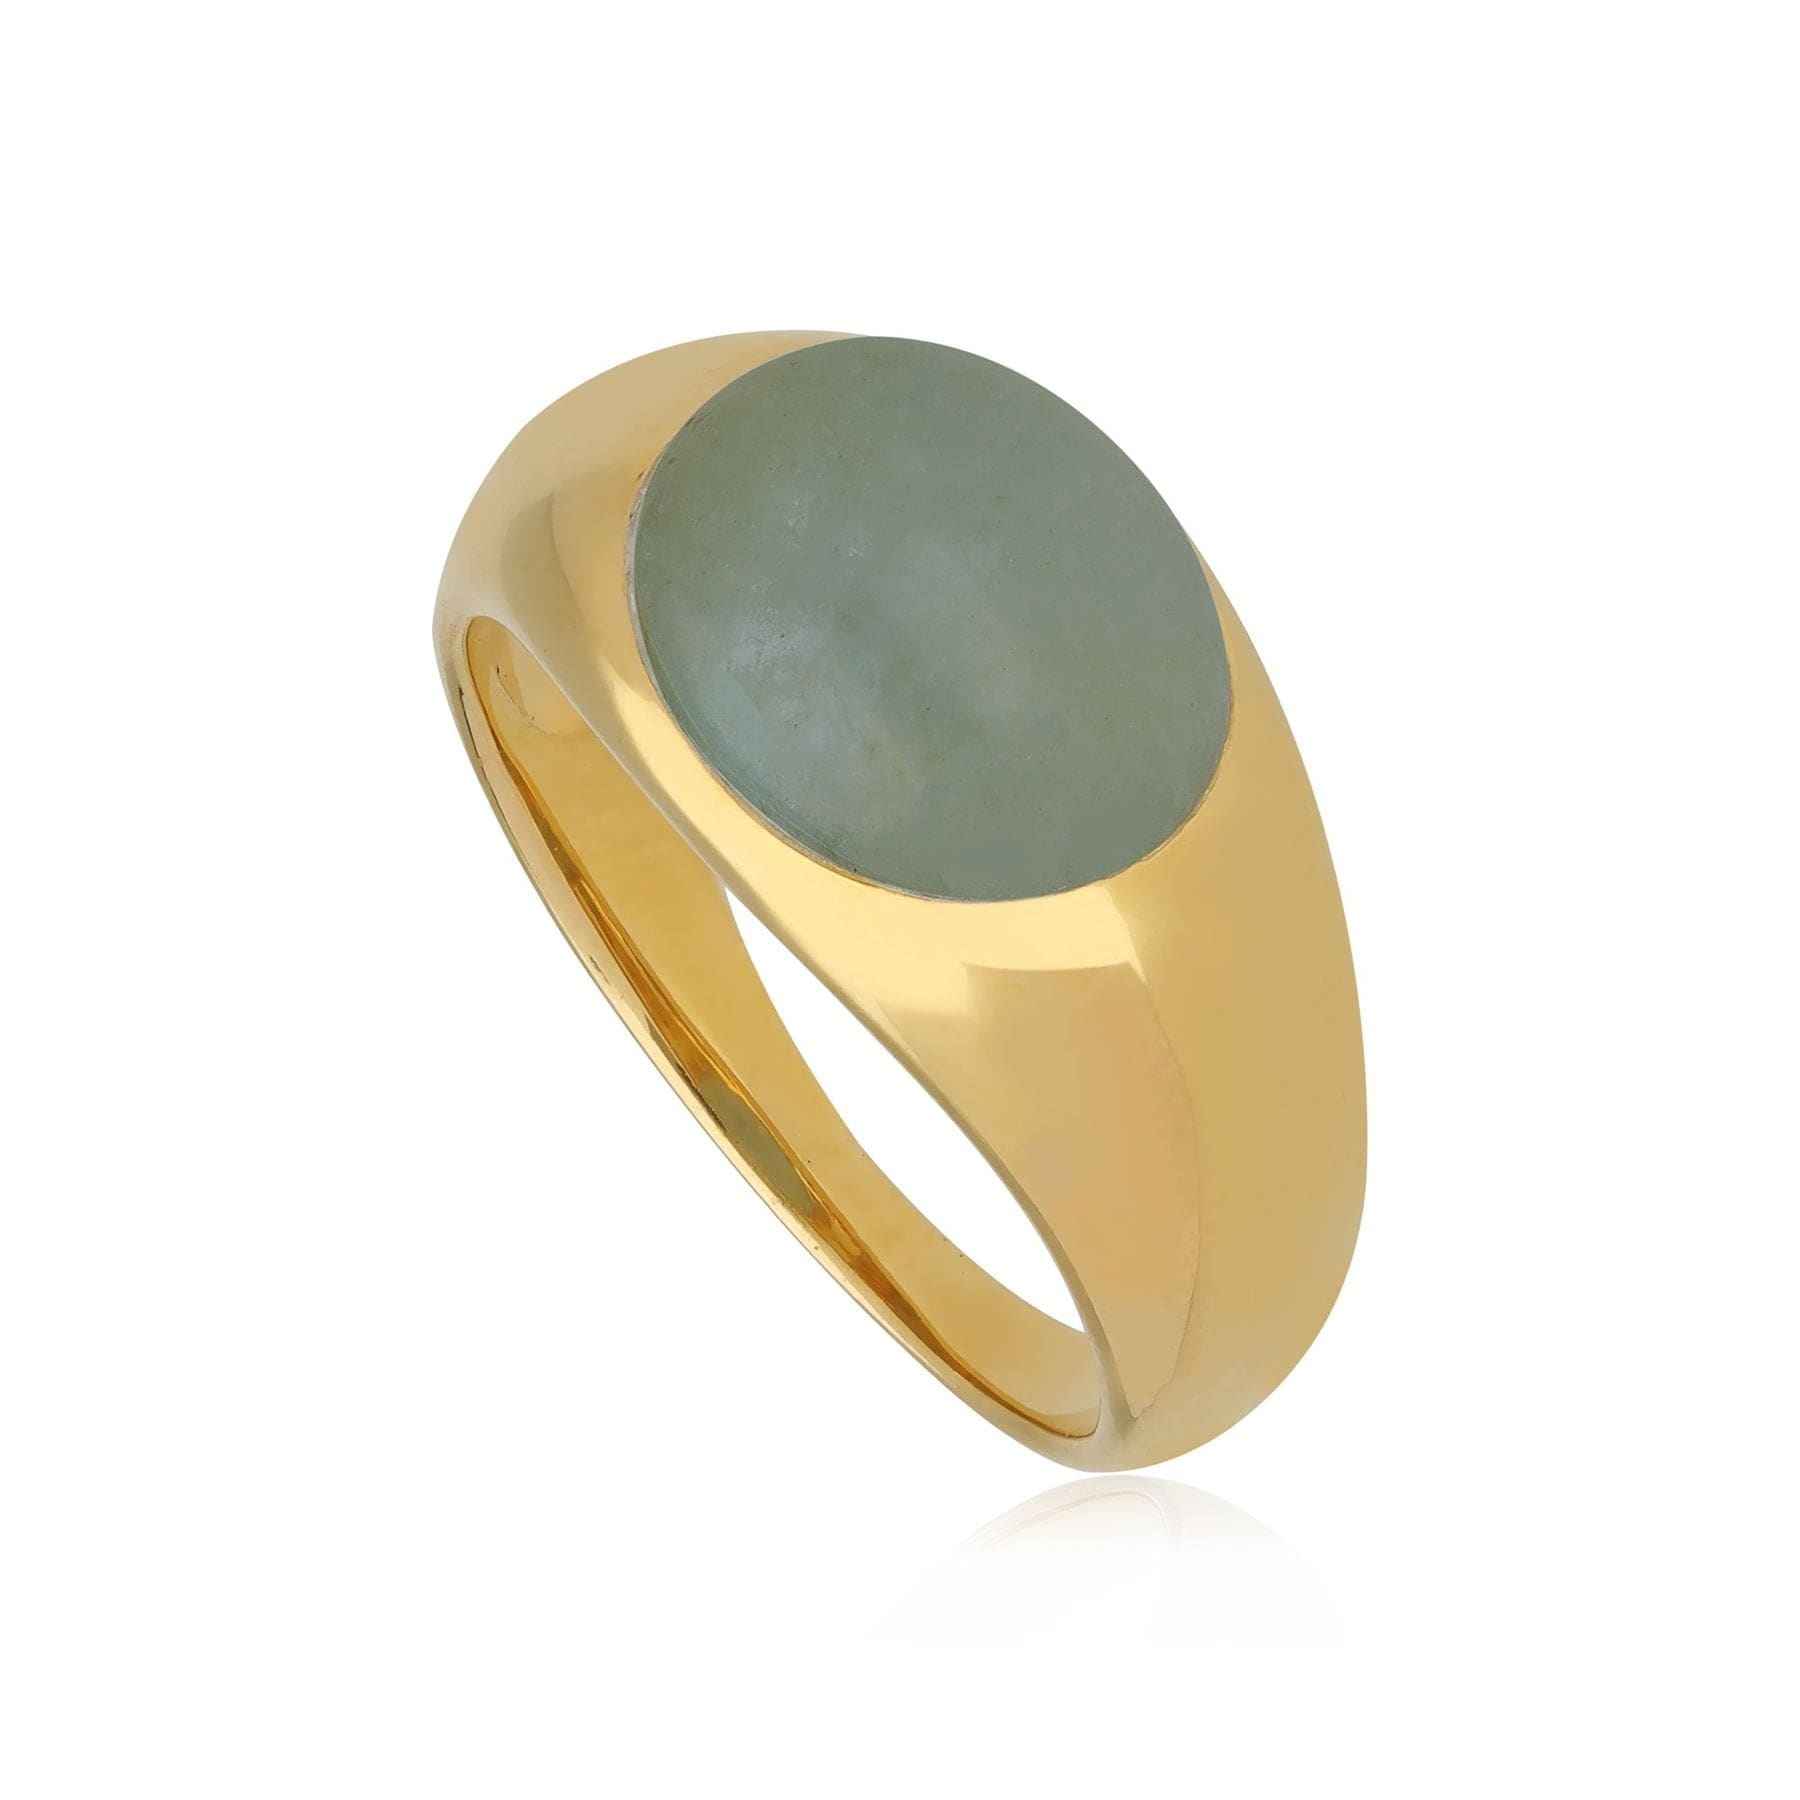 Kosmos Emerald Cocktail Ring in Gold Plated 925 Sterling Silver - Gemondo